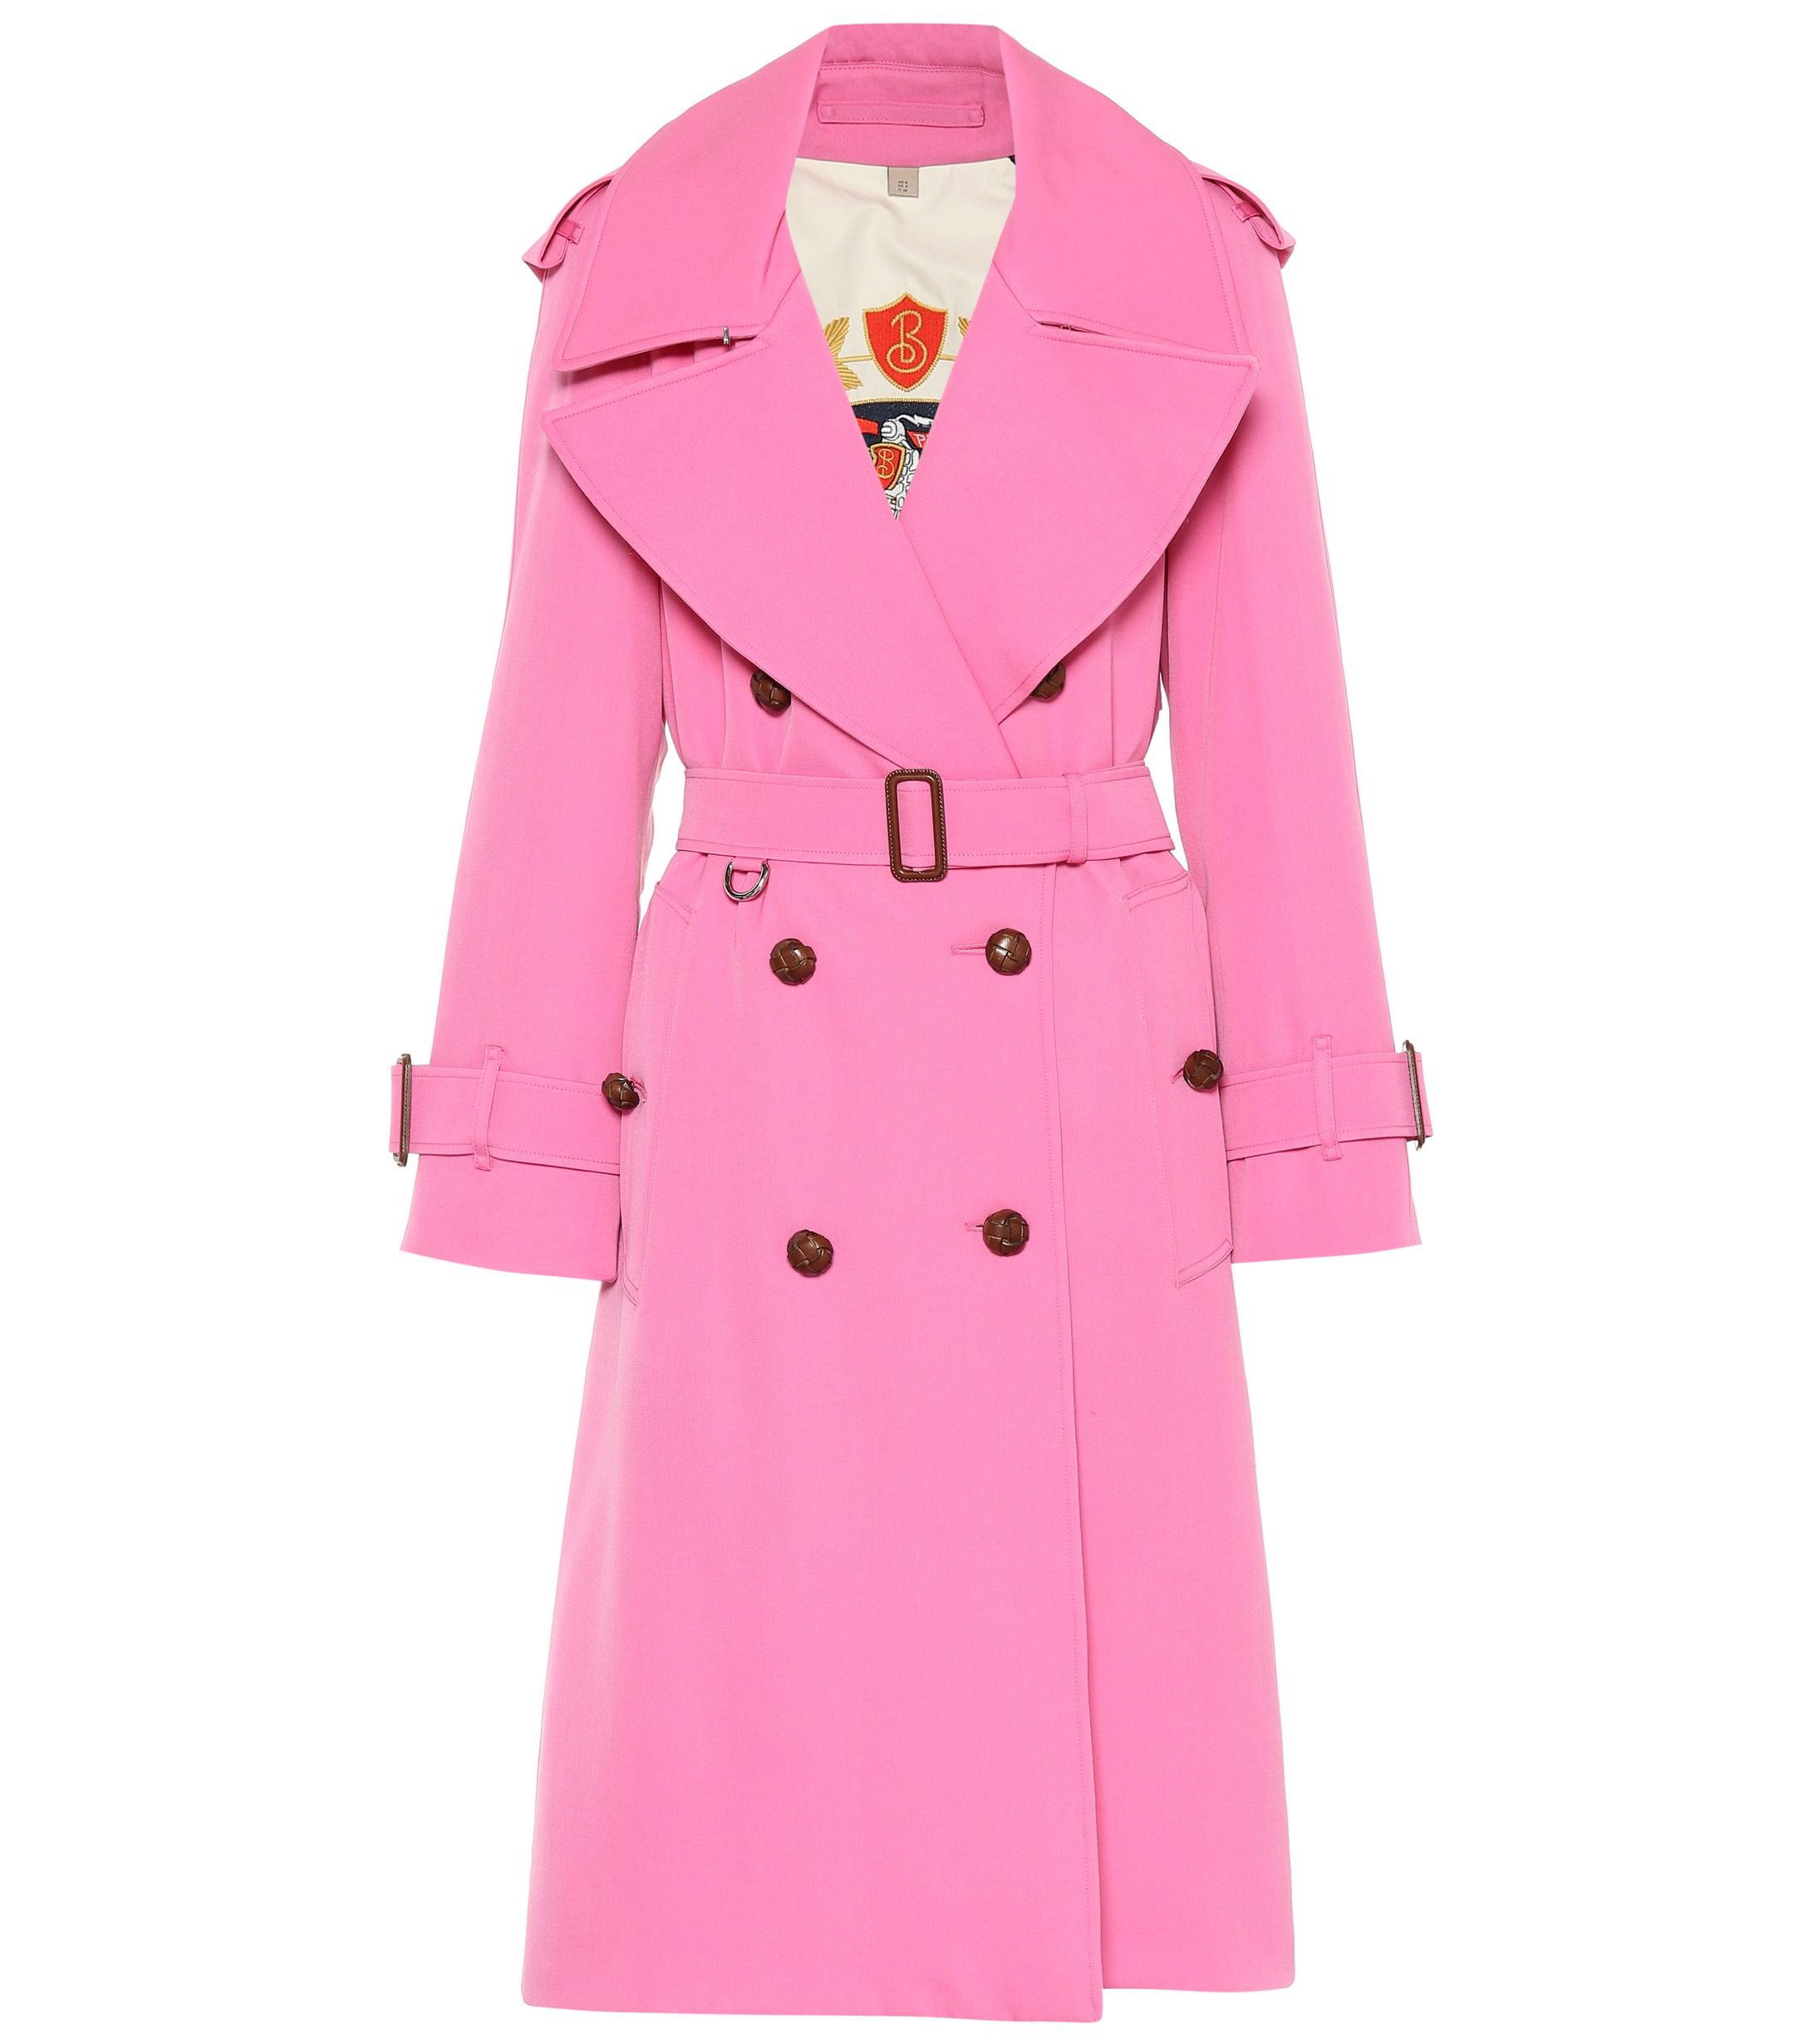 Burberry Regina 30 Wool Trench Coat in Bright Pink (Pink) - Lyst